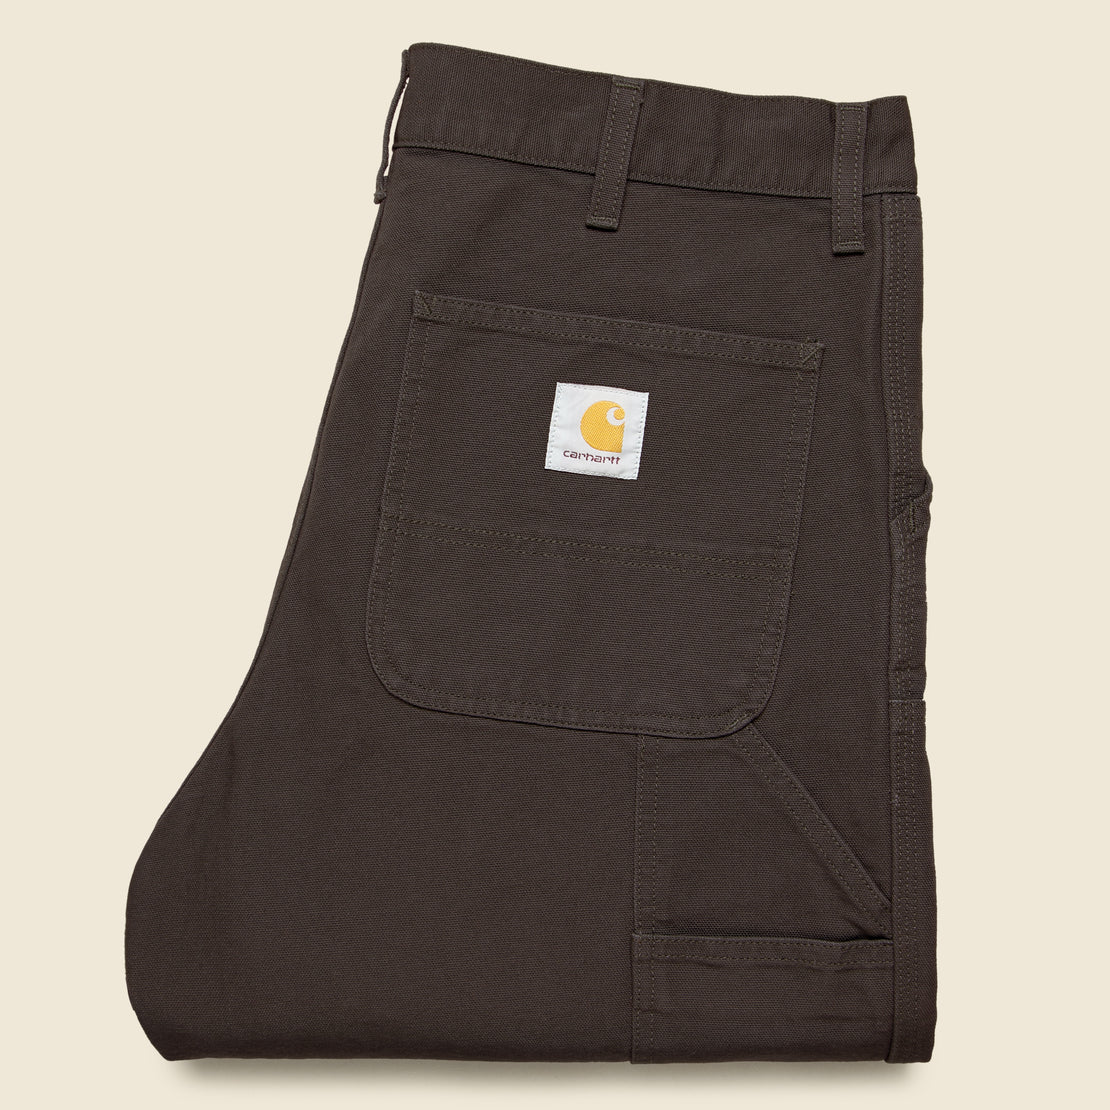 Double Knee Pant - Tobacco - Carhartt WIP - STAG Provisions - Pants - Twill